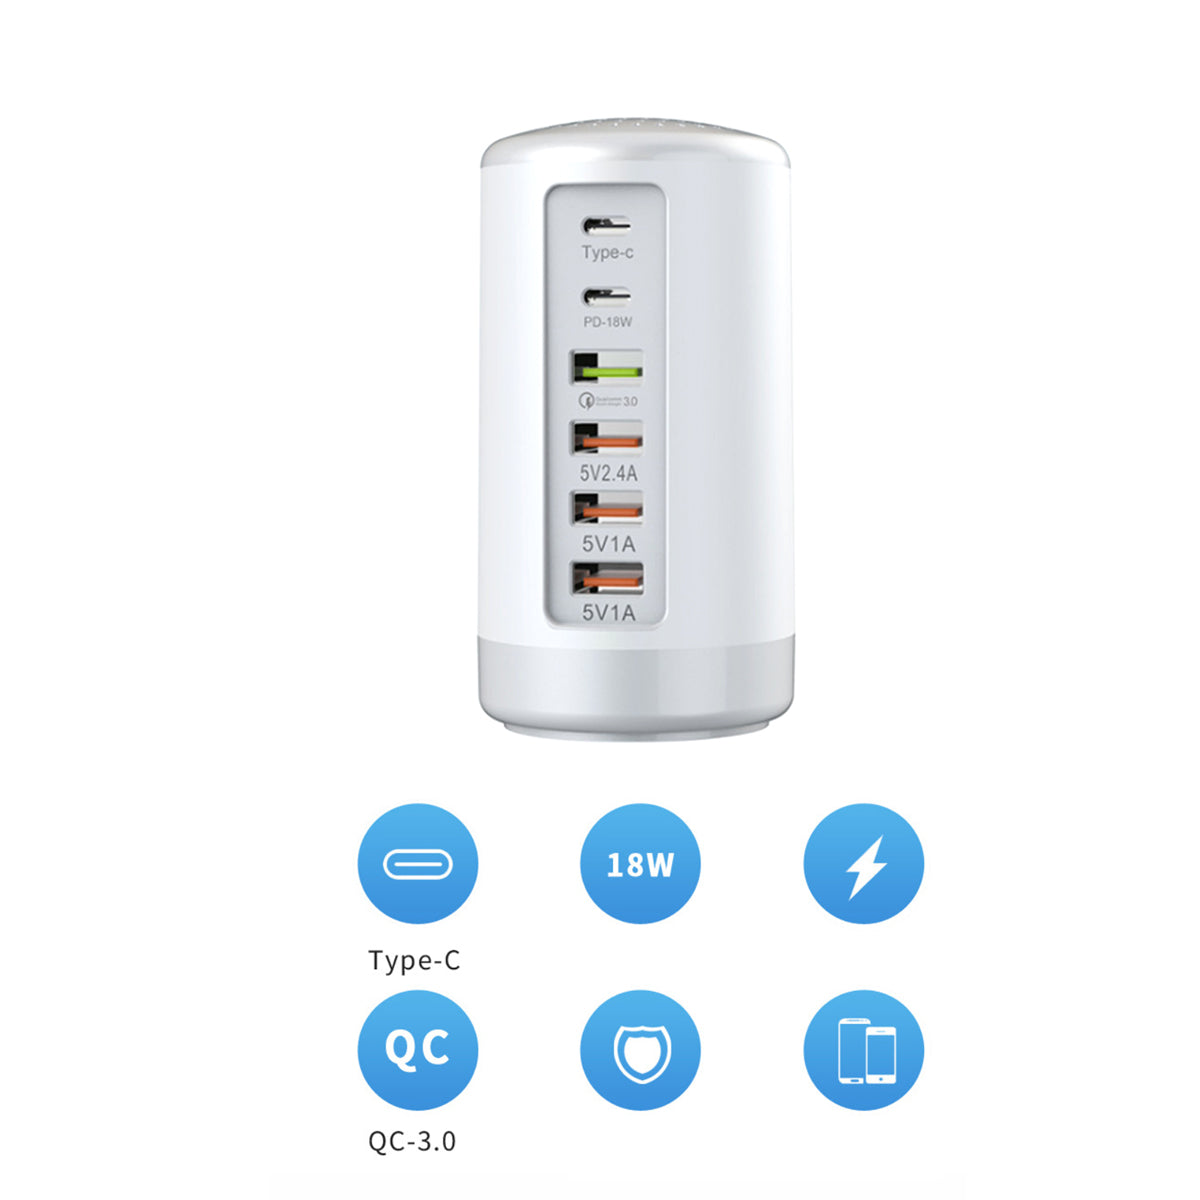 Tower USB With 6 High Speed Charging Ports by VistaShops